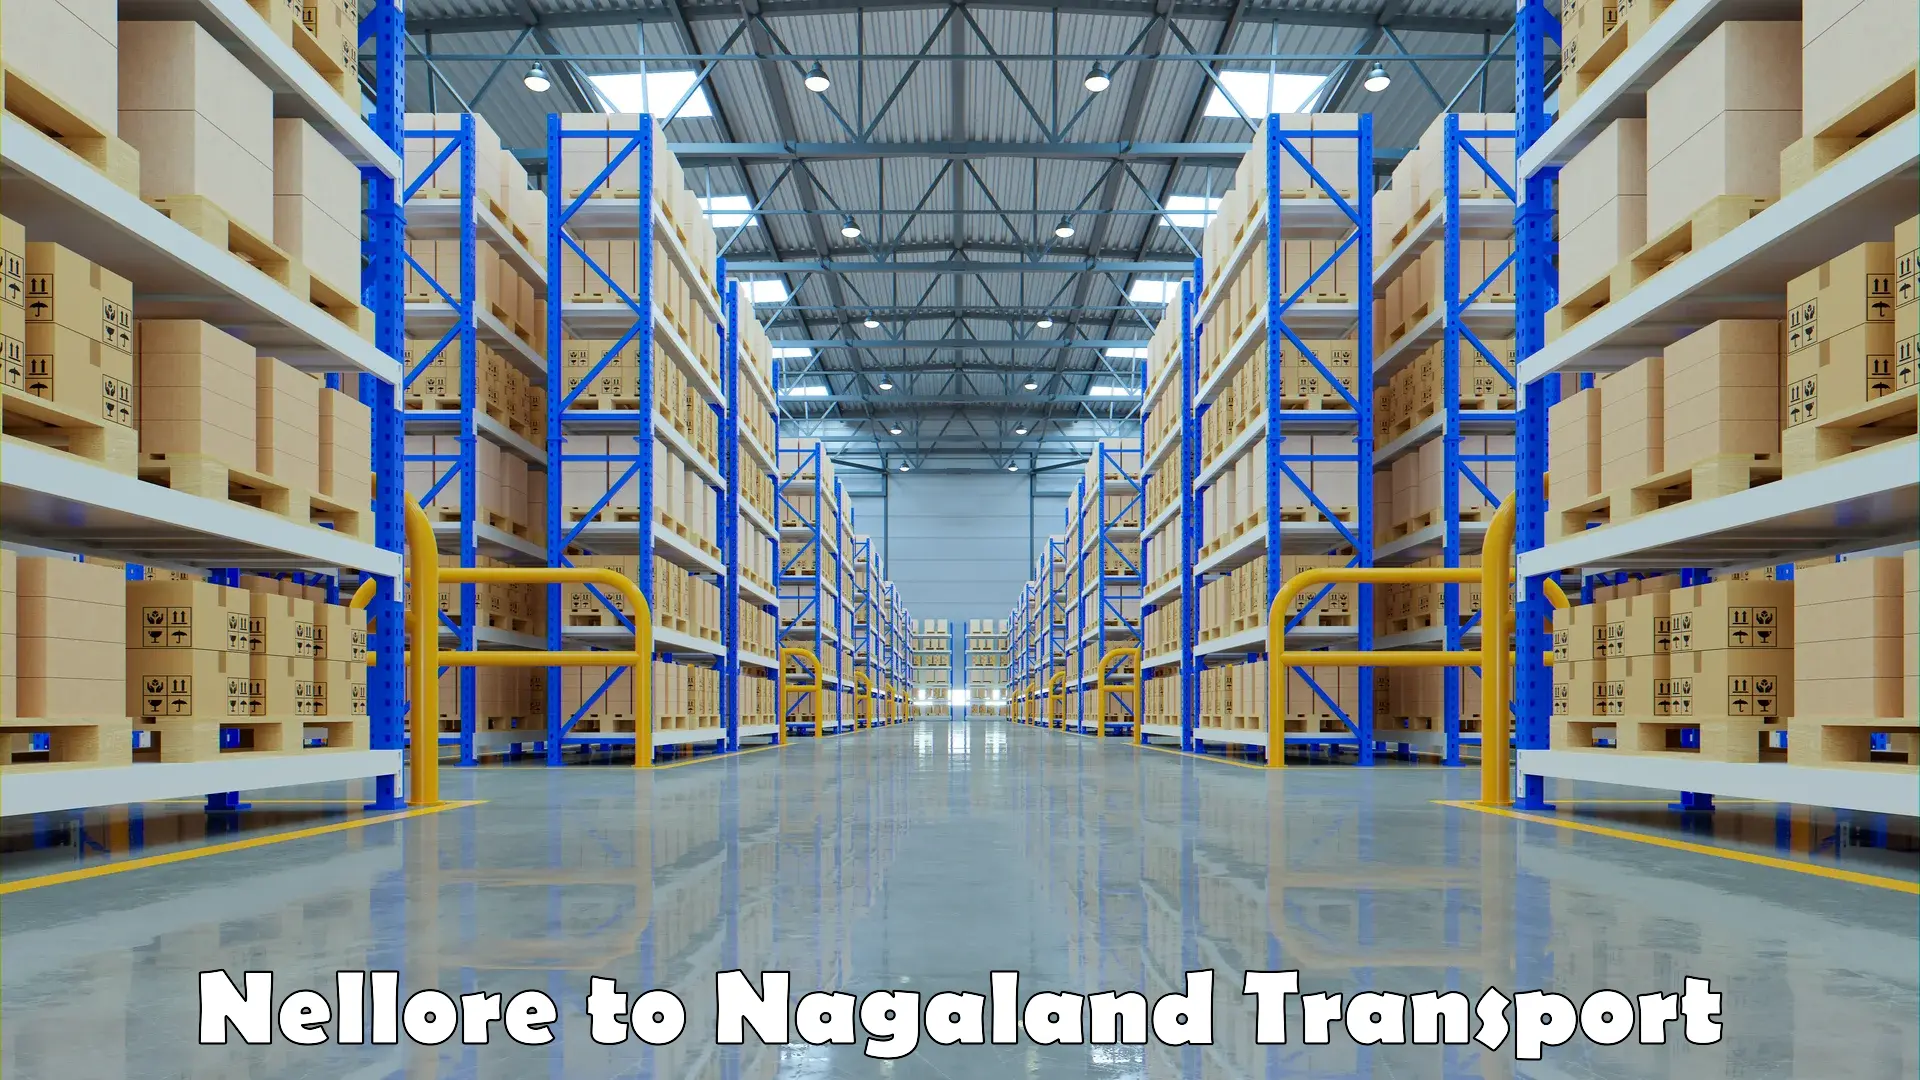 Online transport service Nellore to Nagaland